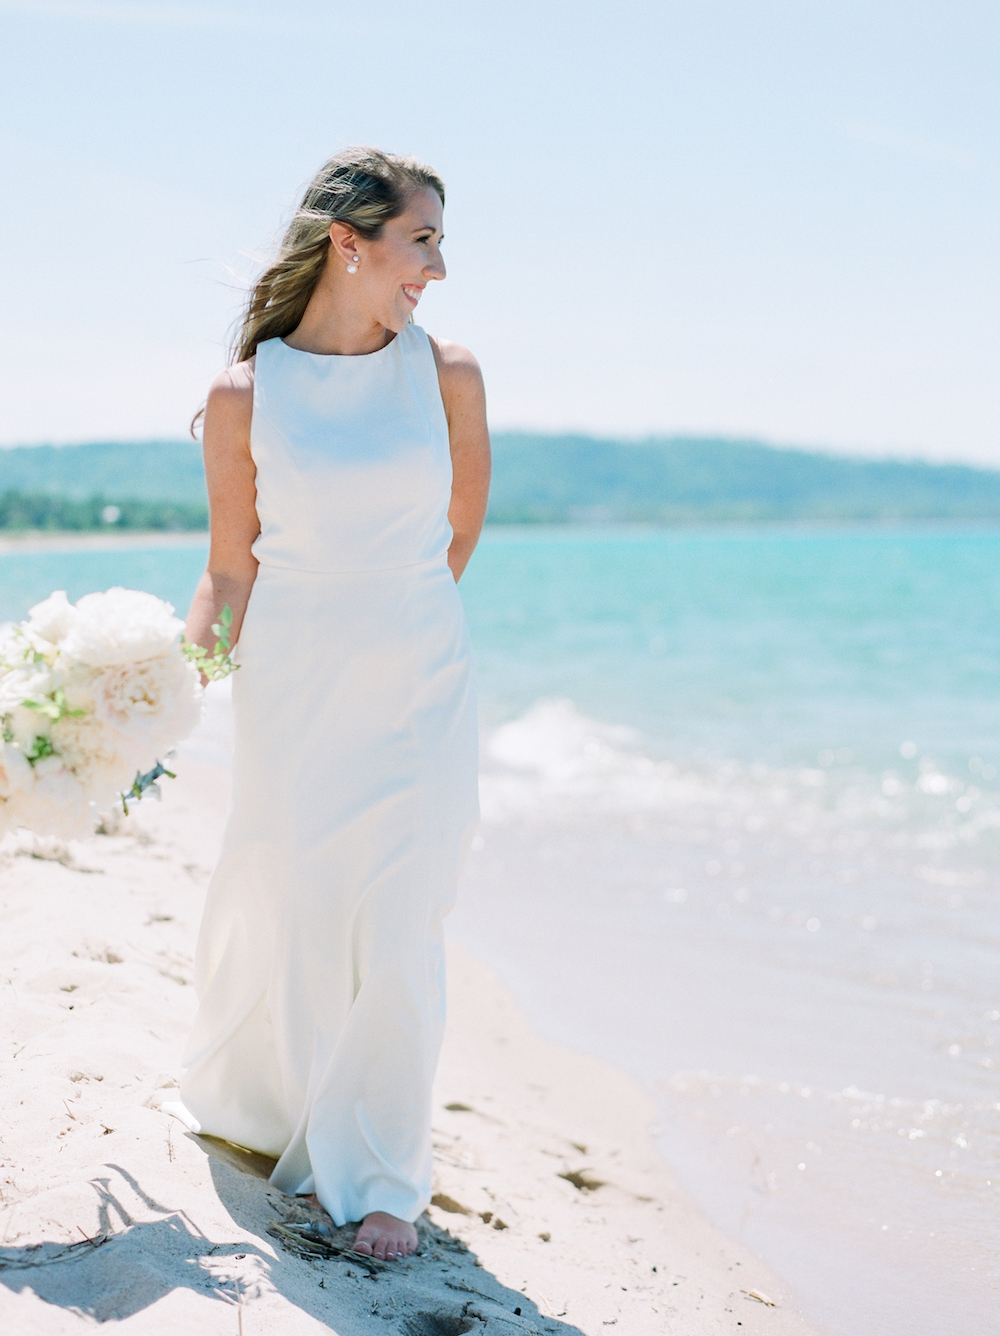 A bride smiling on the beach